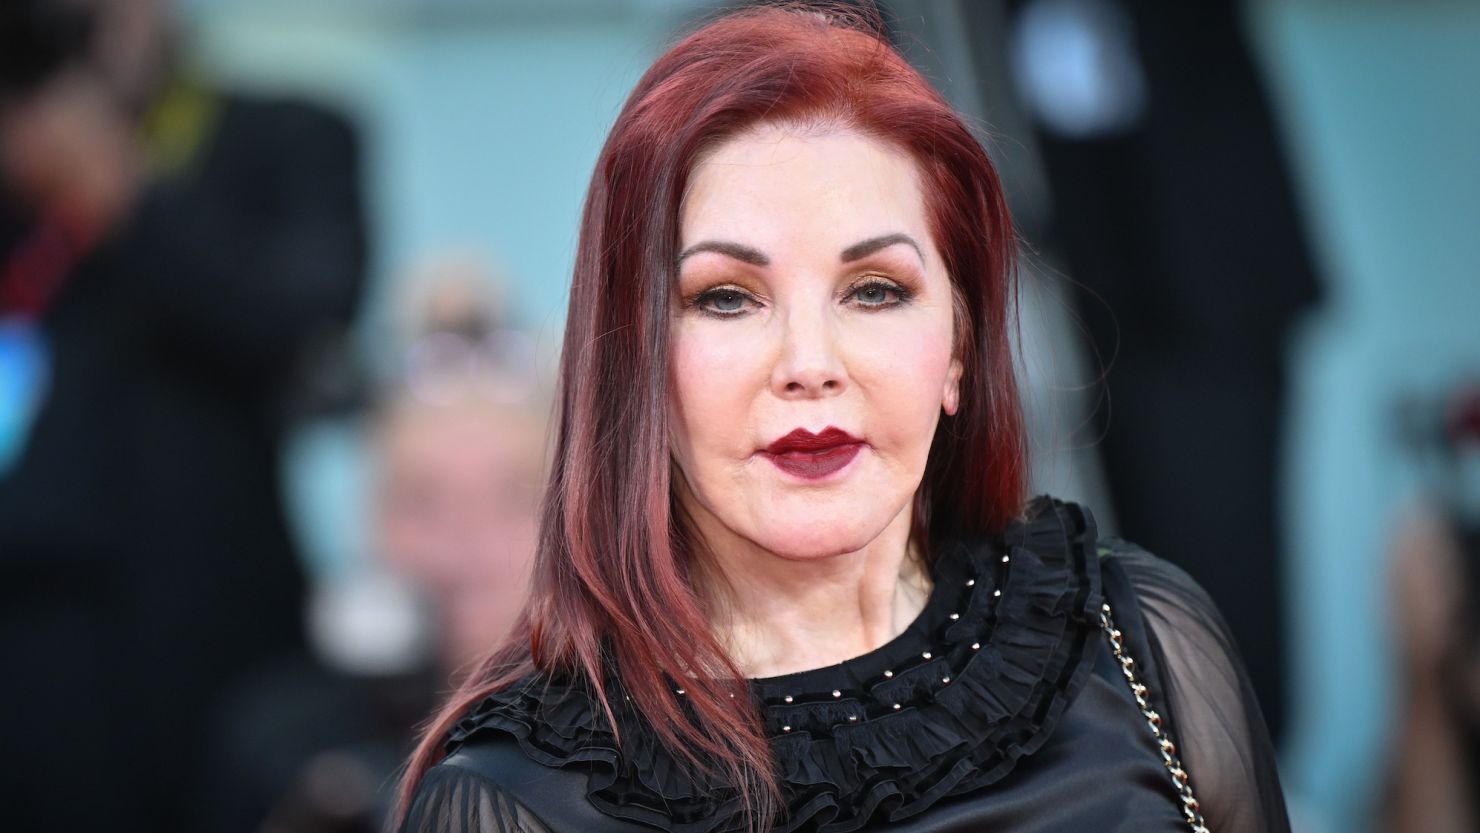 VENICE, ITALY - SEPTEMBER 04: Priscilla Presley attends a red carpet for the movie "Priscilla" at the 80th Venice International Film Festival on September 04, 2023 in Venice, Italy. (Photo by Stephane Cardinale - Corbis/Corbis via Getty Images)